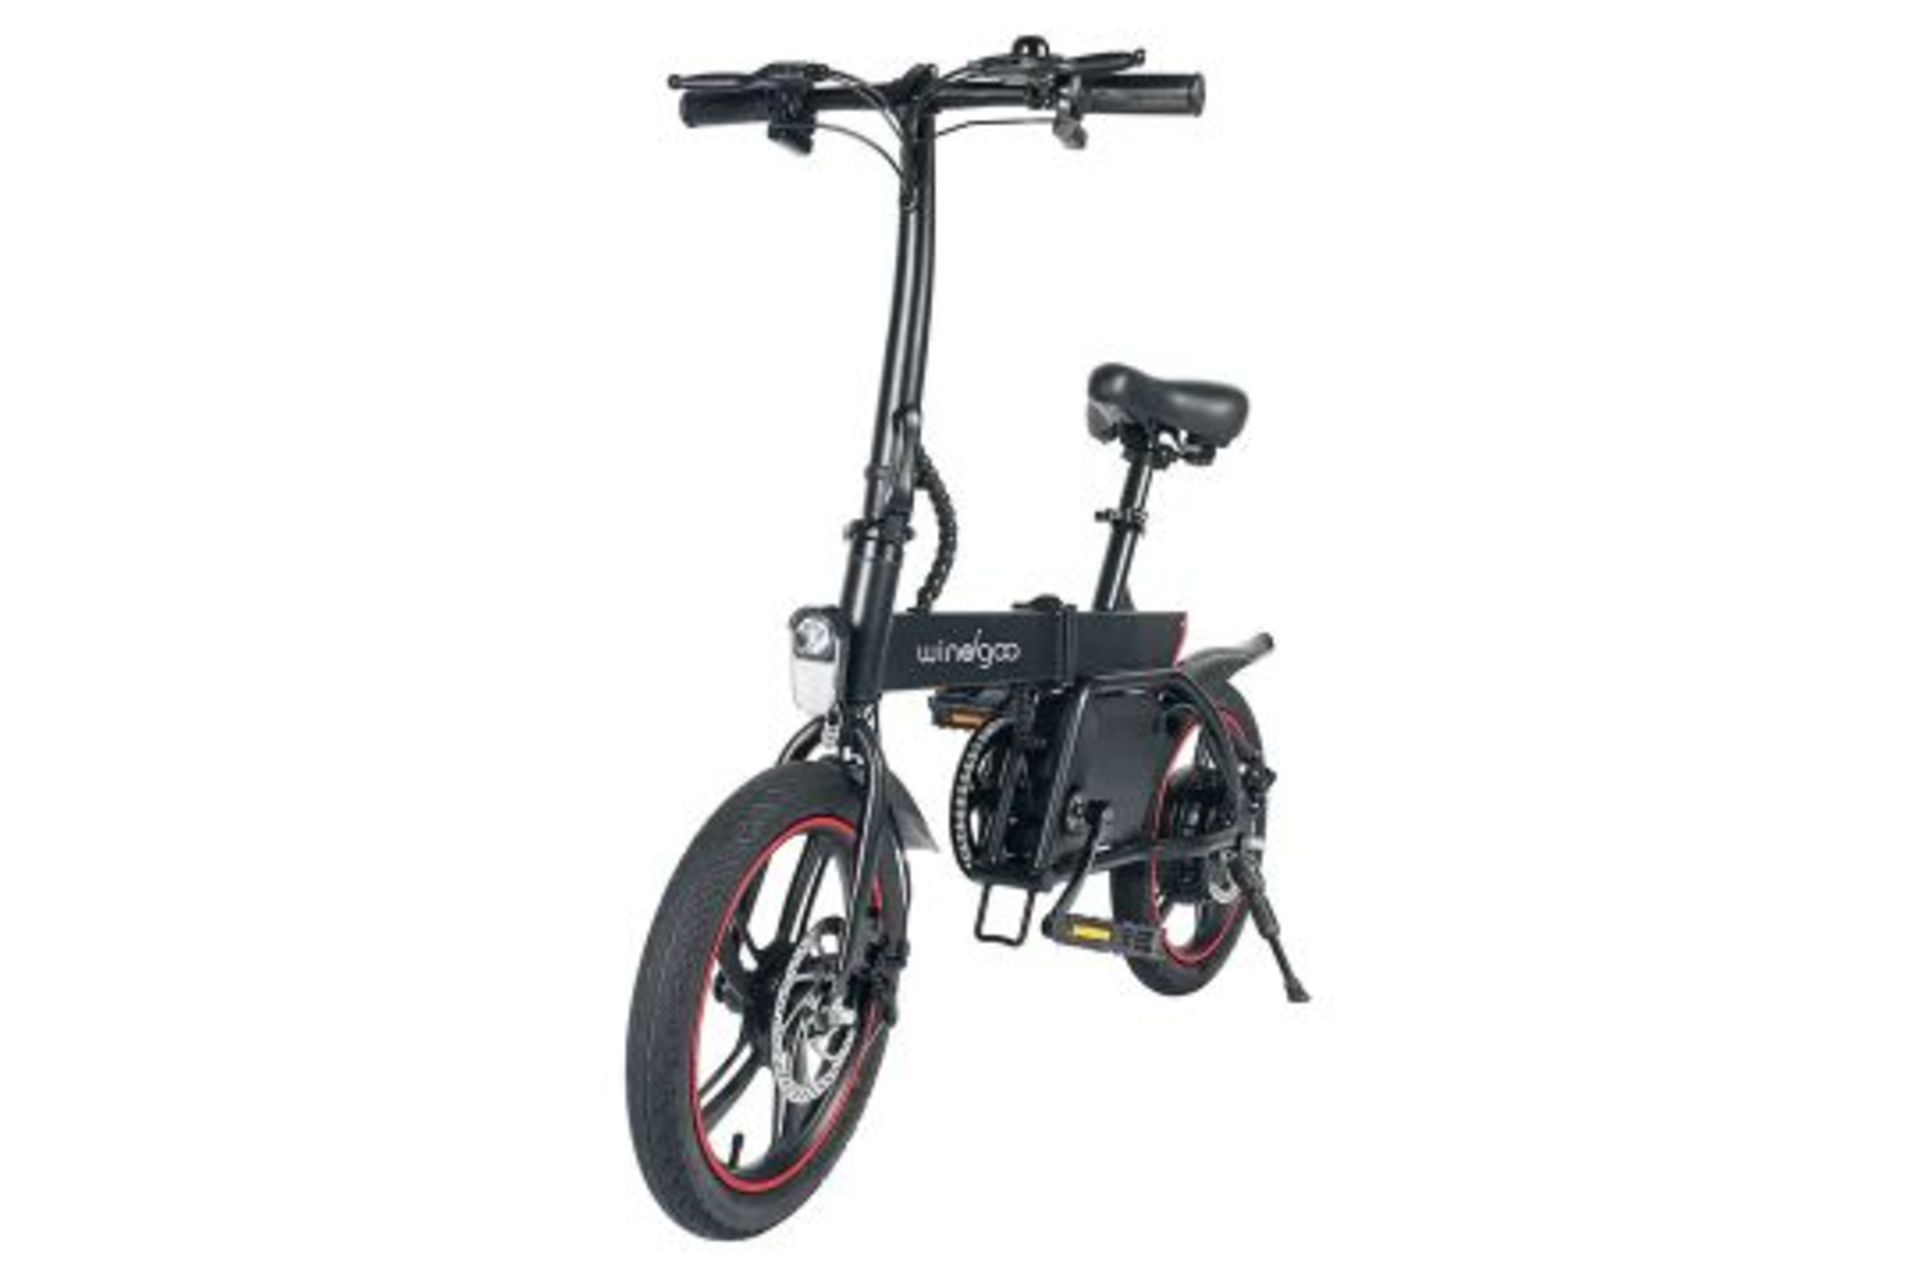 Windgoo B20 Pro Electric Bike. RRP £1,100.99. With 16-inch-wide tires and a frame of - Image 3 of 3